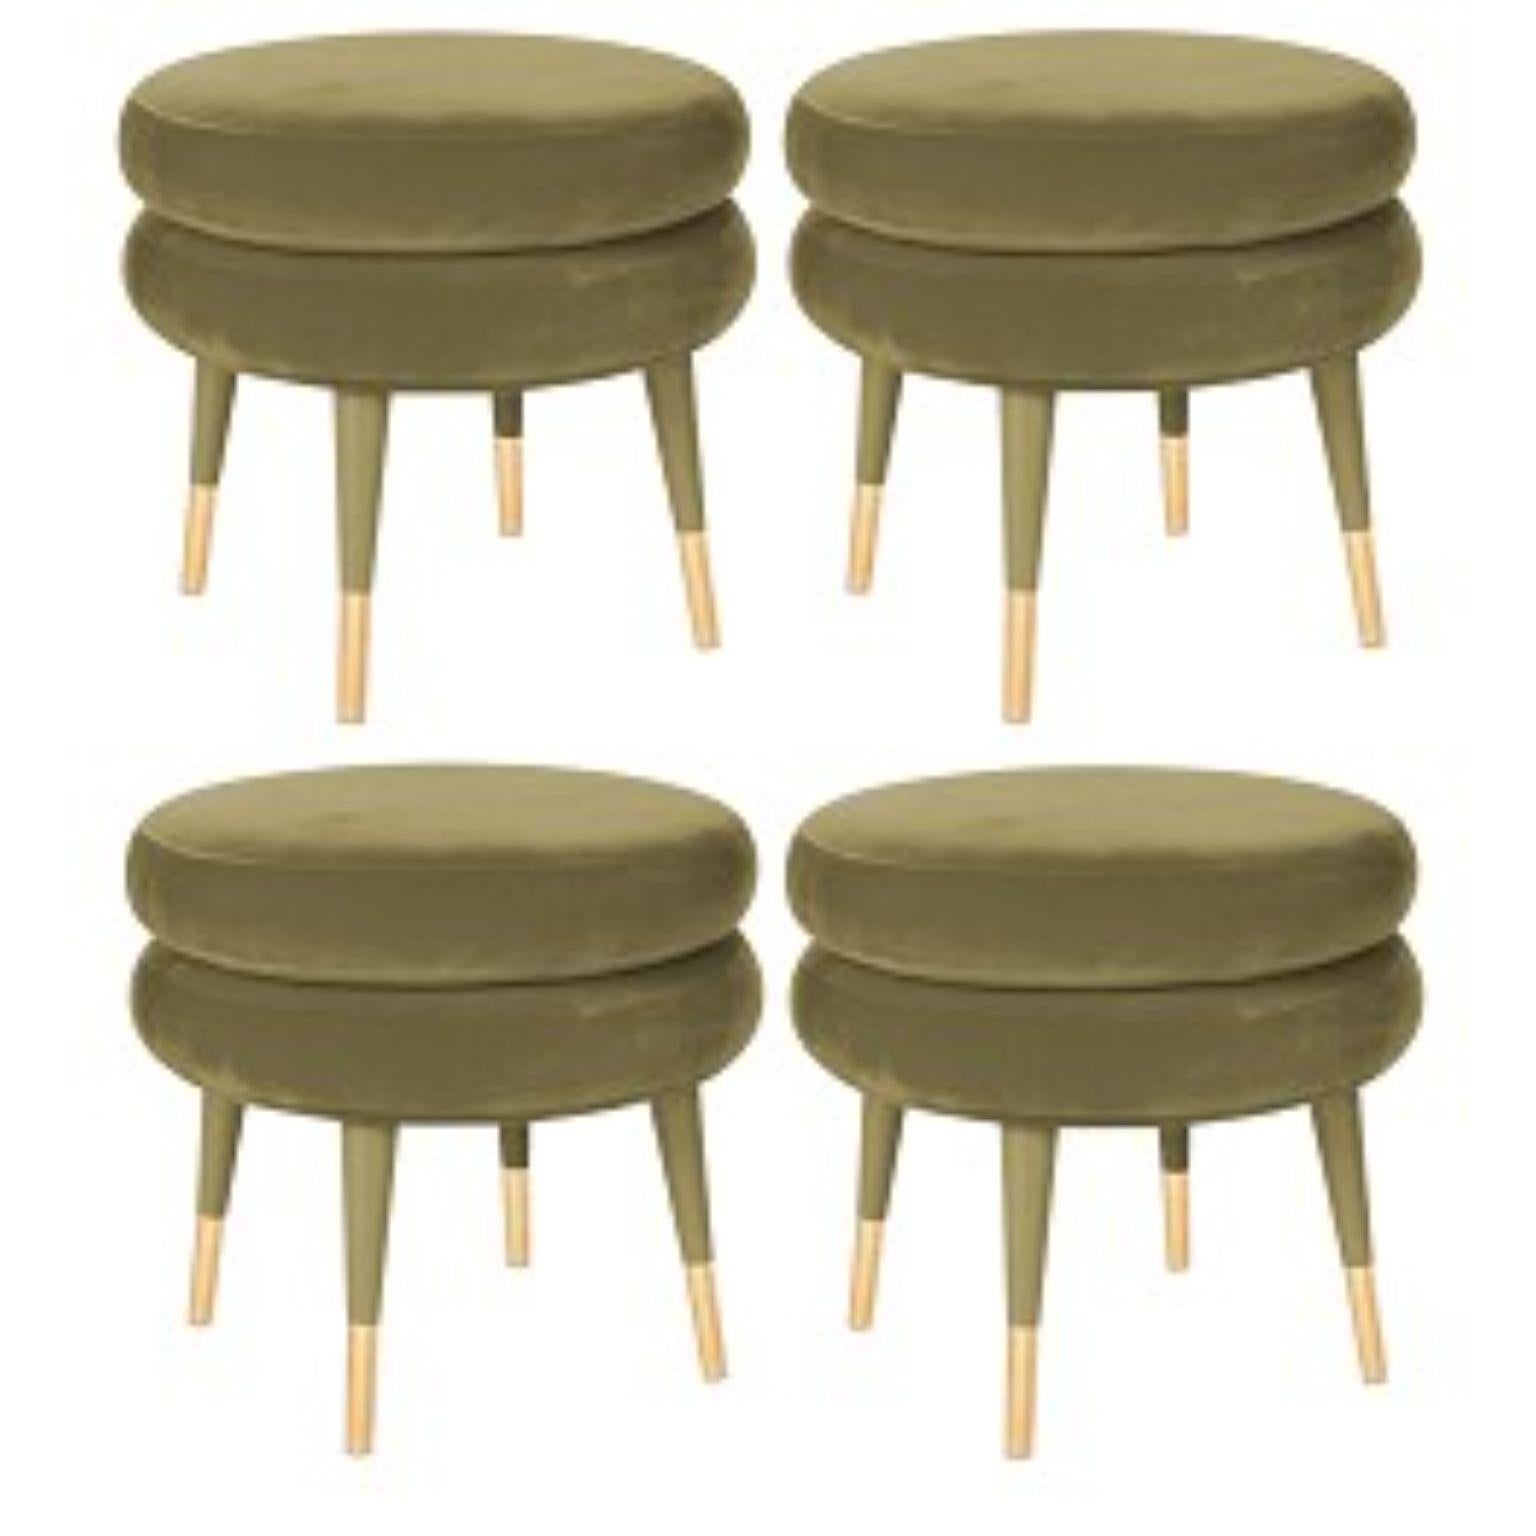 Set of 4 marshmallow stools, Royal Stranger
Dimensions: 45 x 50 x 50 cm
Materials: Velvet upholestery, brass
Available in: Mint green, light pink, royal green, royal red

Royal Stranger is an exclusive furniture brand determined to bring you